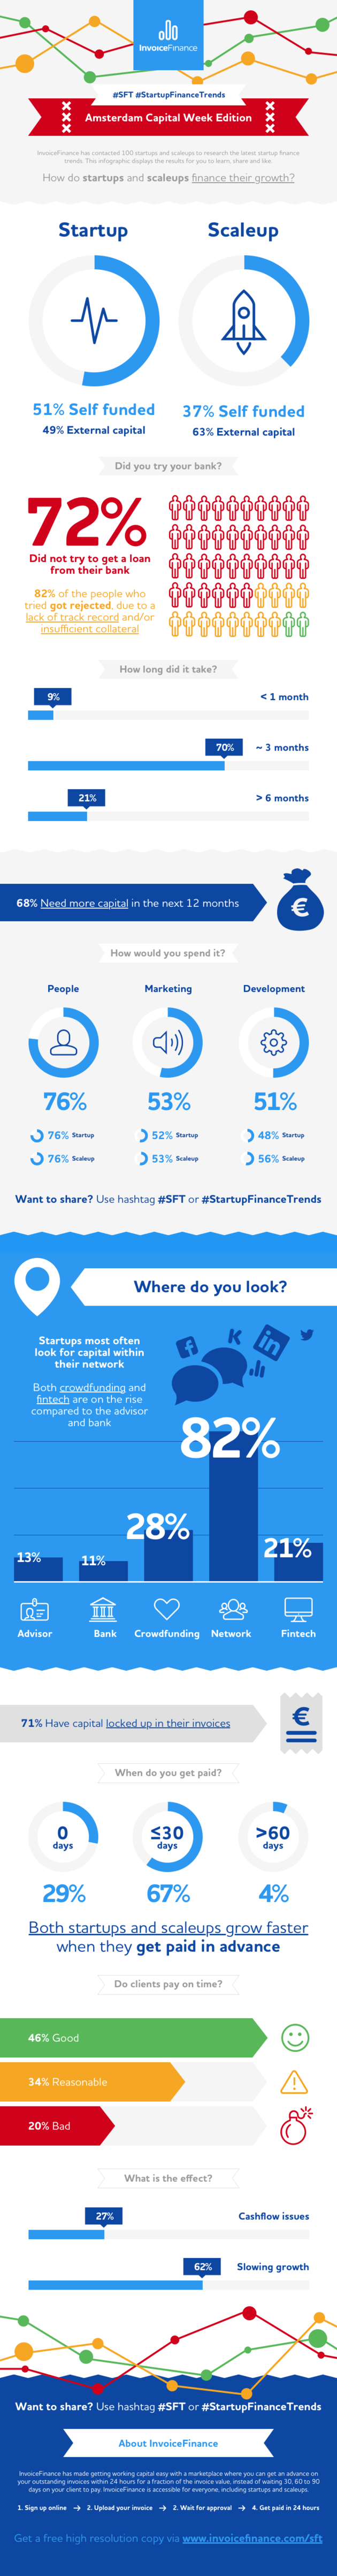 Startup Finance Trends Infographic